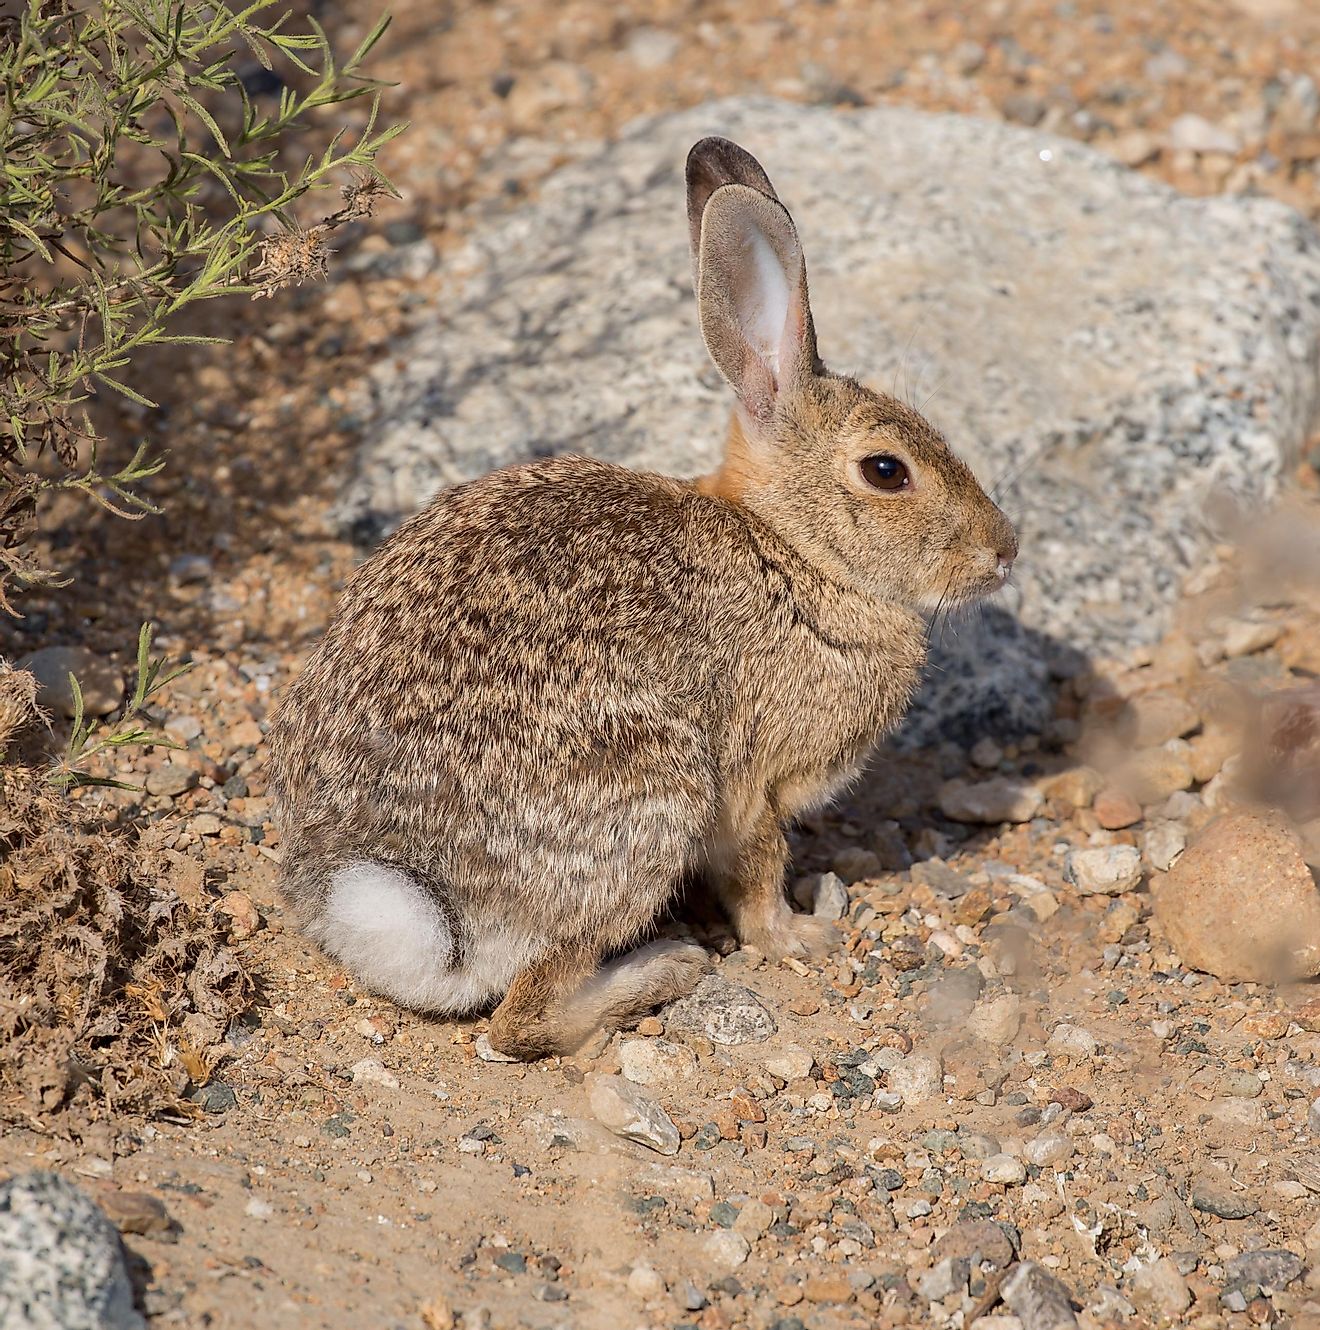 The fur pattern and color of the Desert Cottontail blends in quite nicely with the terrain of their native habitats.